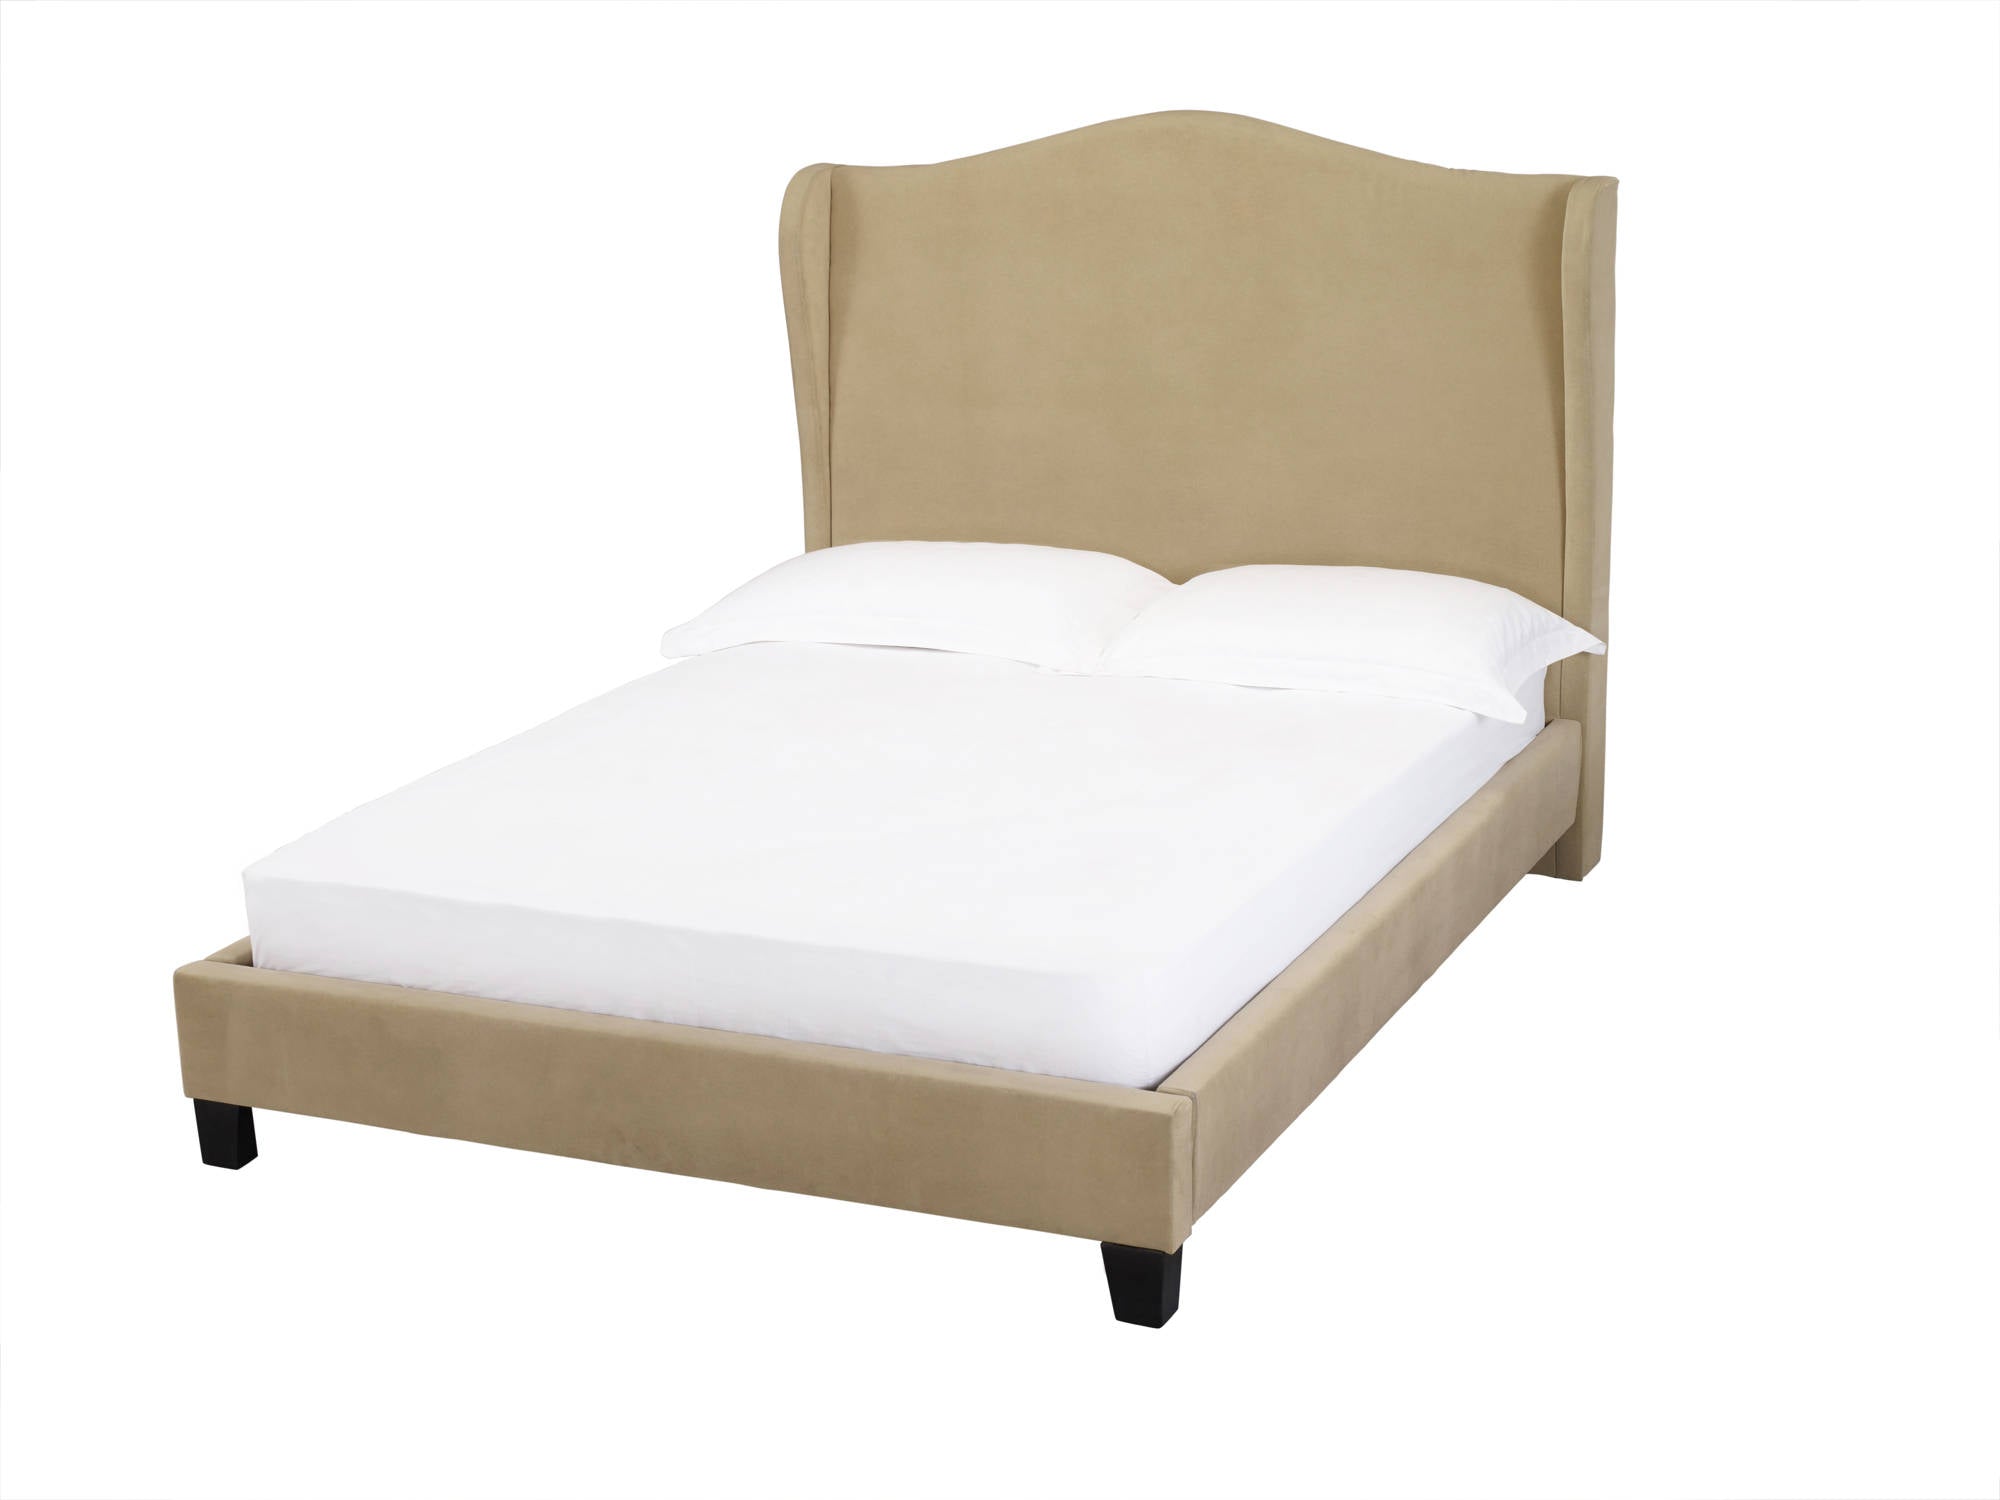 Cheverny King Size Bed in Beige - Ezzo